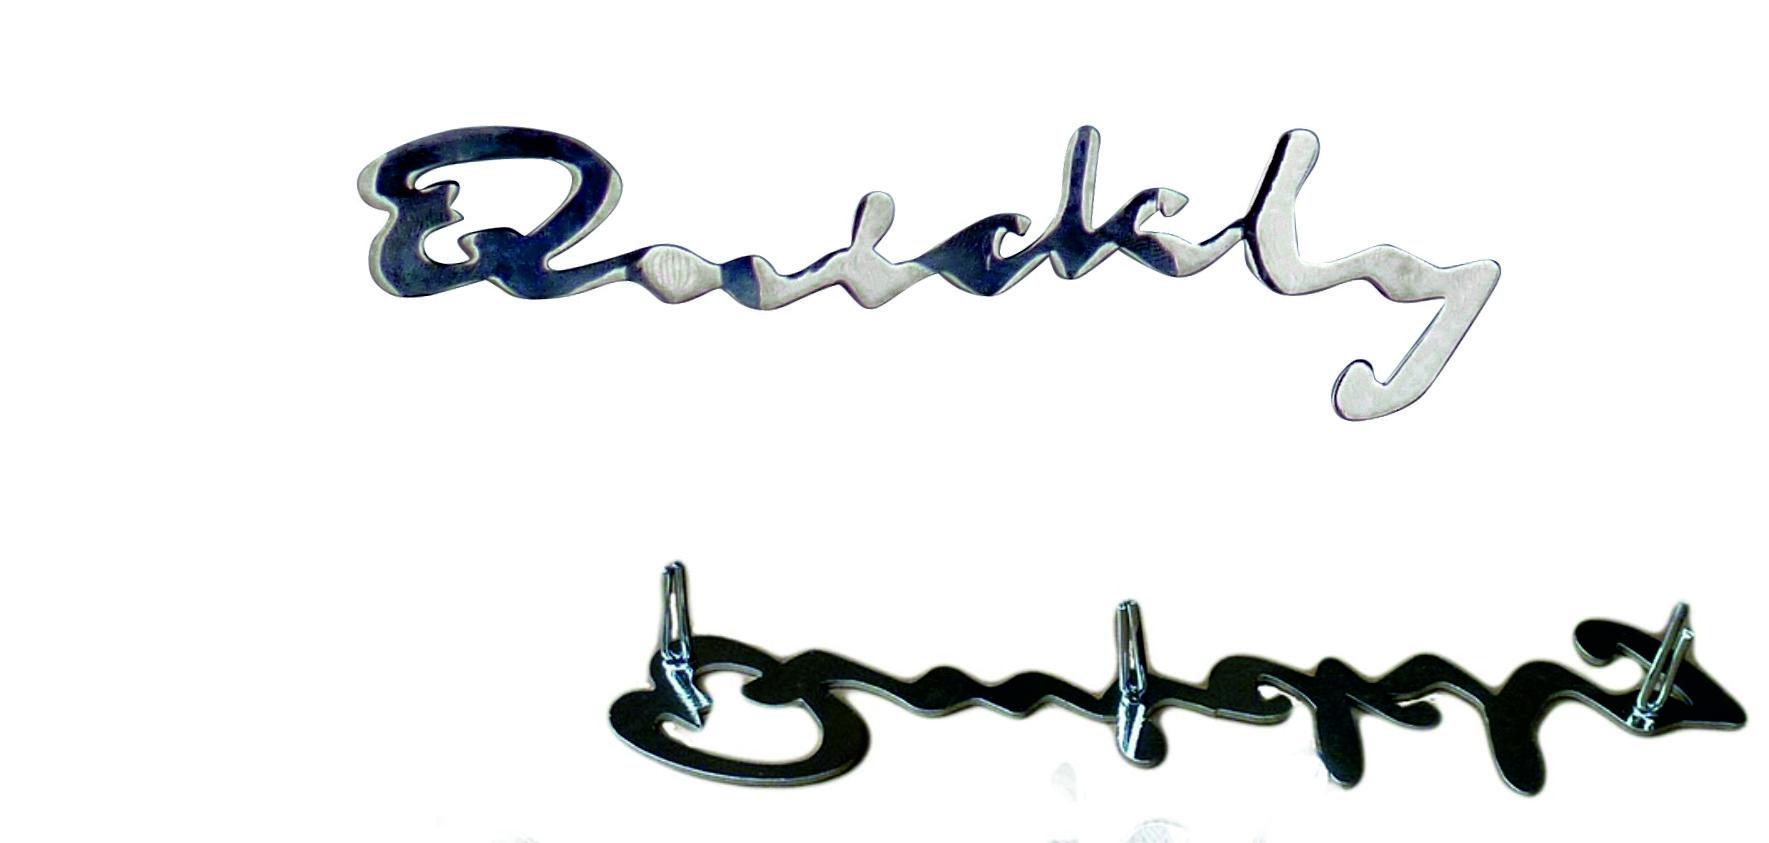 Quickly" lettering for Quickly L rear frame, pair